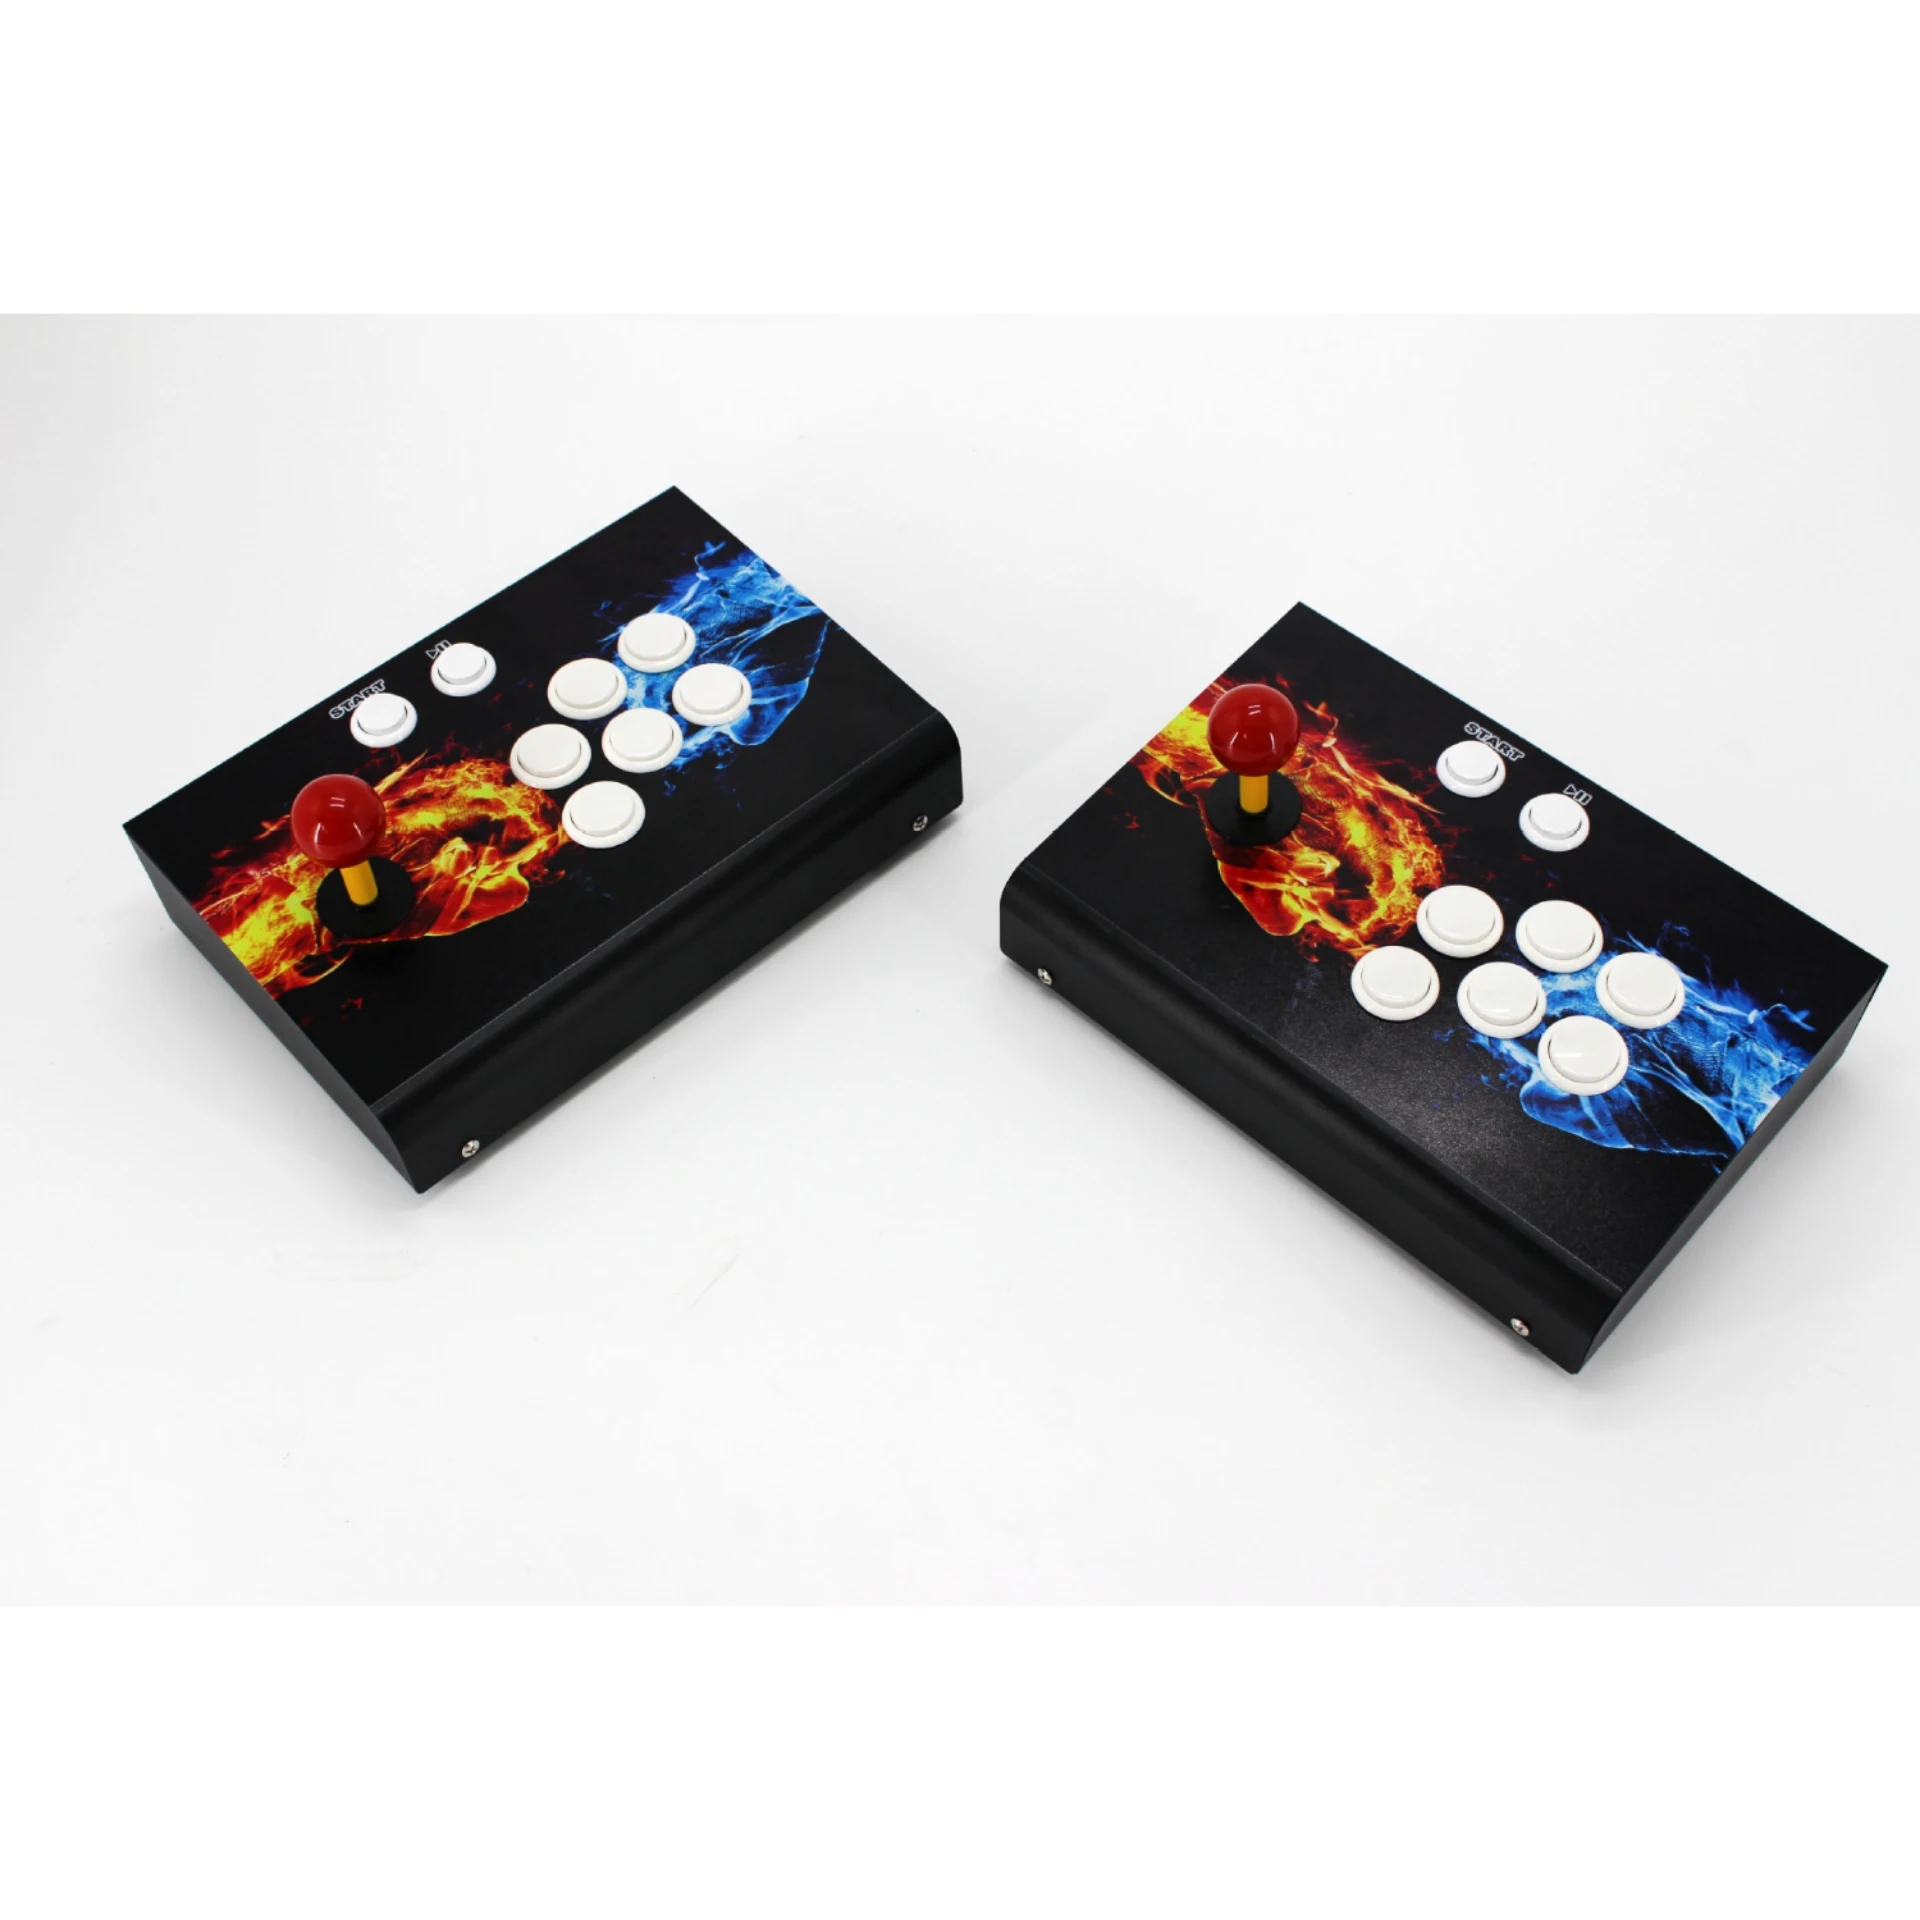 

Double Separable 3D Moonlight Treasure Box 18s pro 4500 In 1 with 160pcs 3D games Home Arcade Video Game Console